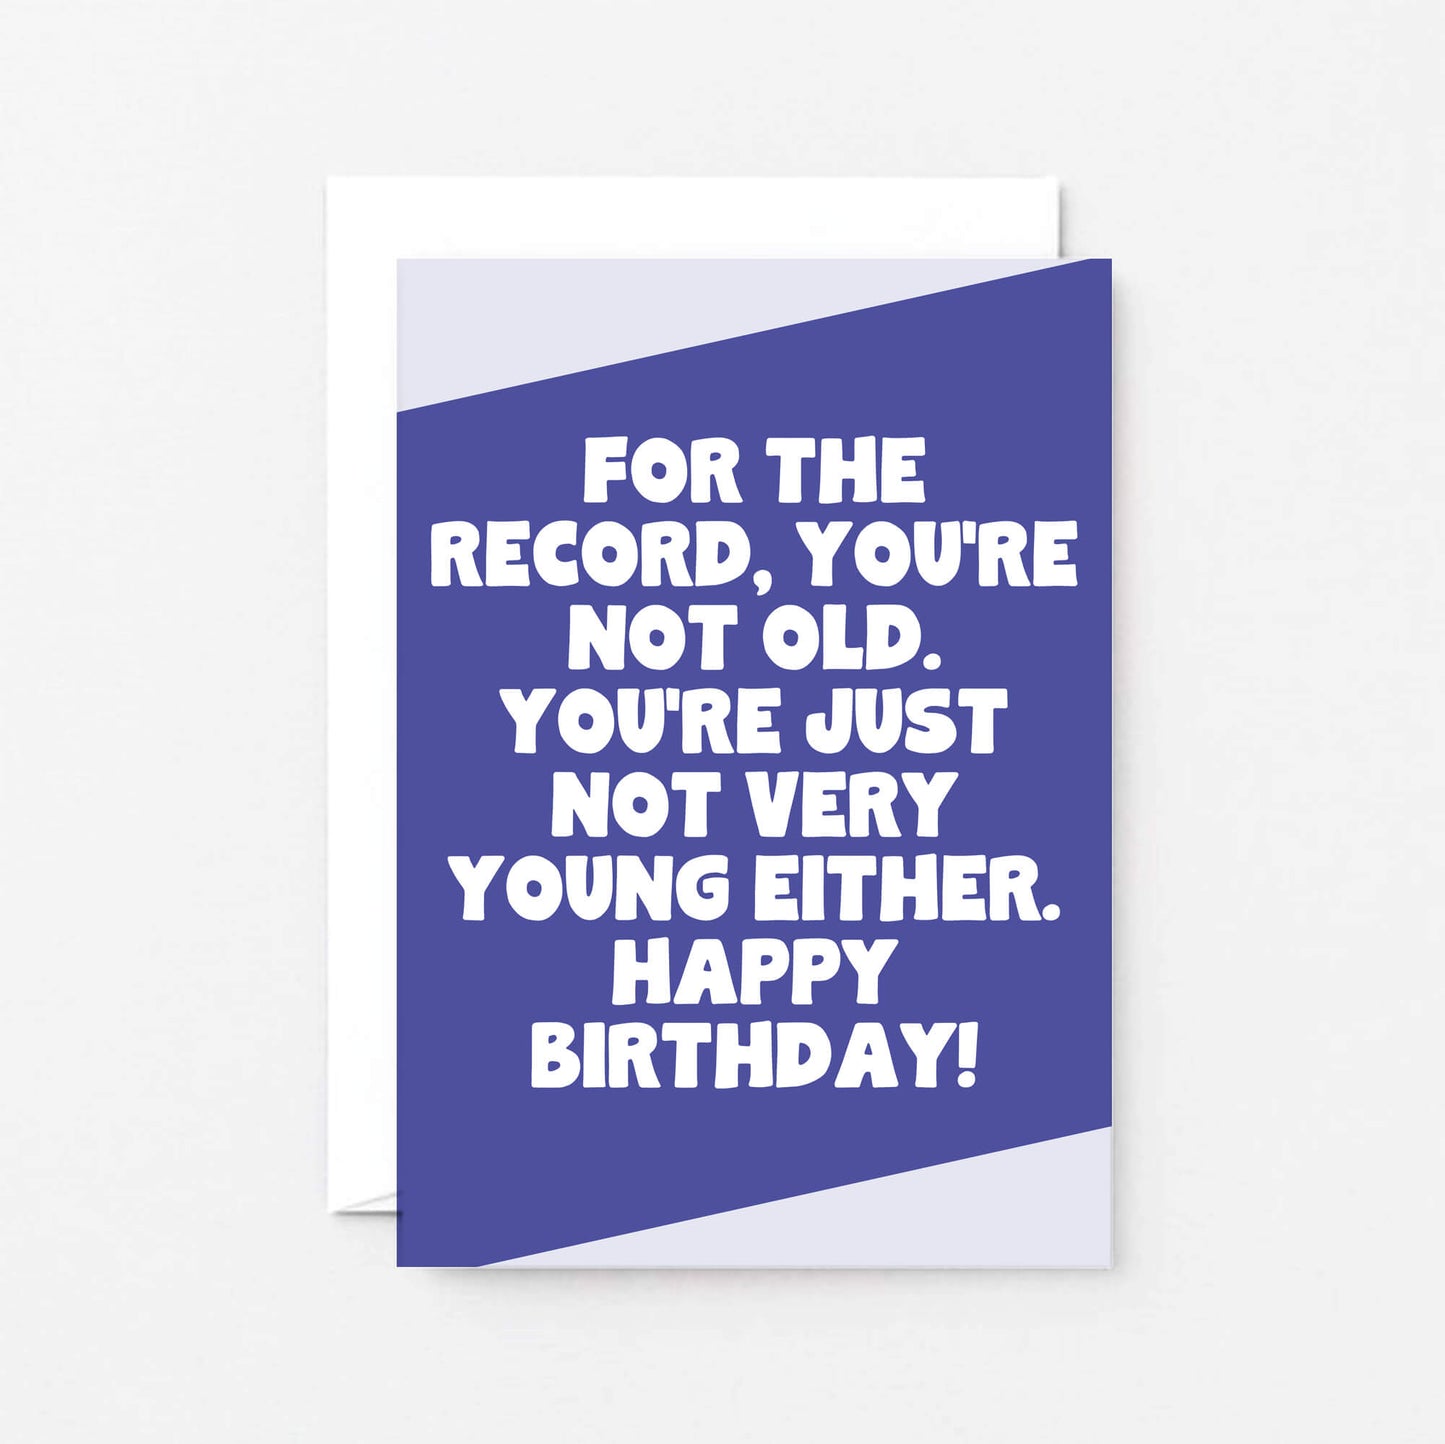 Birthday Card by SixElevenCreations. Reads For the record, you're not old. You're just not very young either. Happy birthday! Product Code SE3073A6